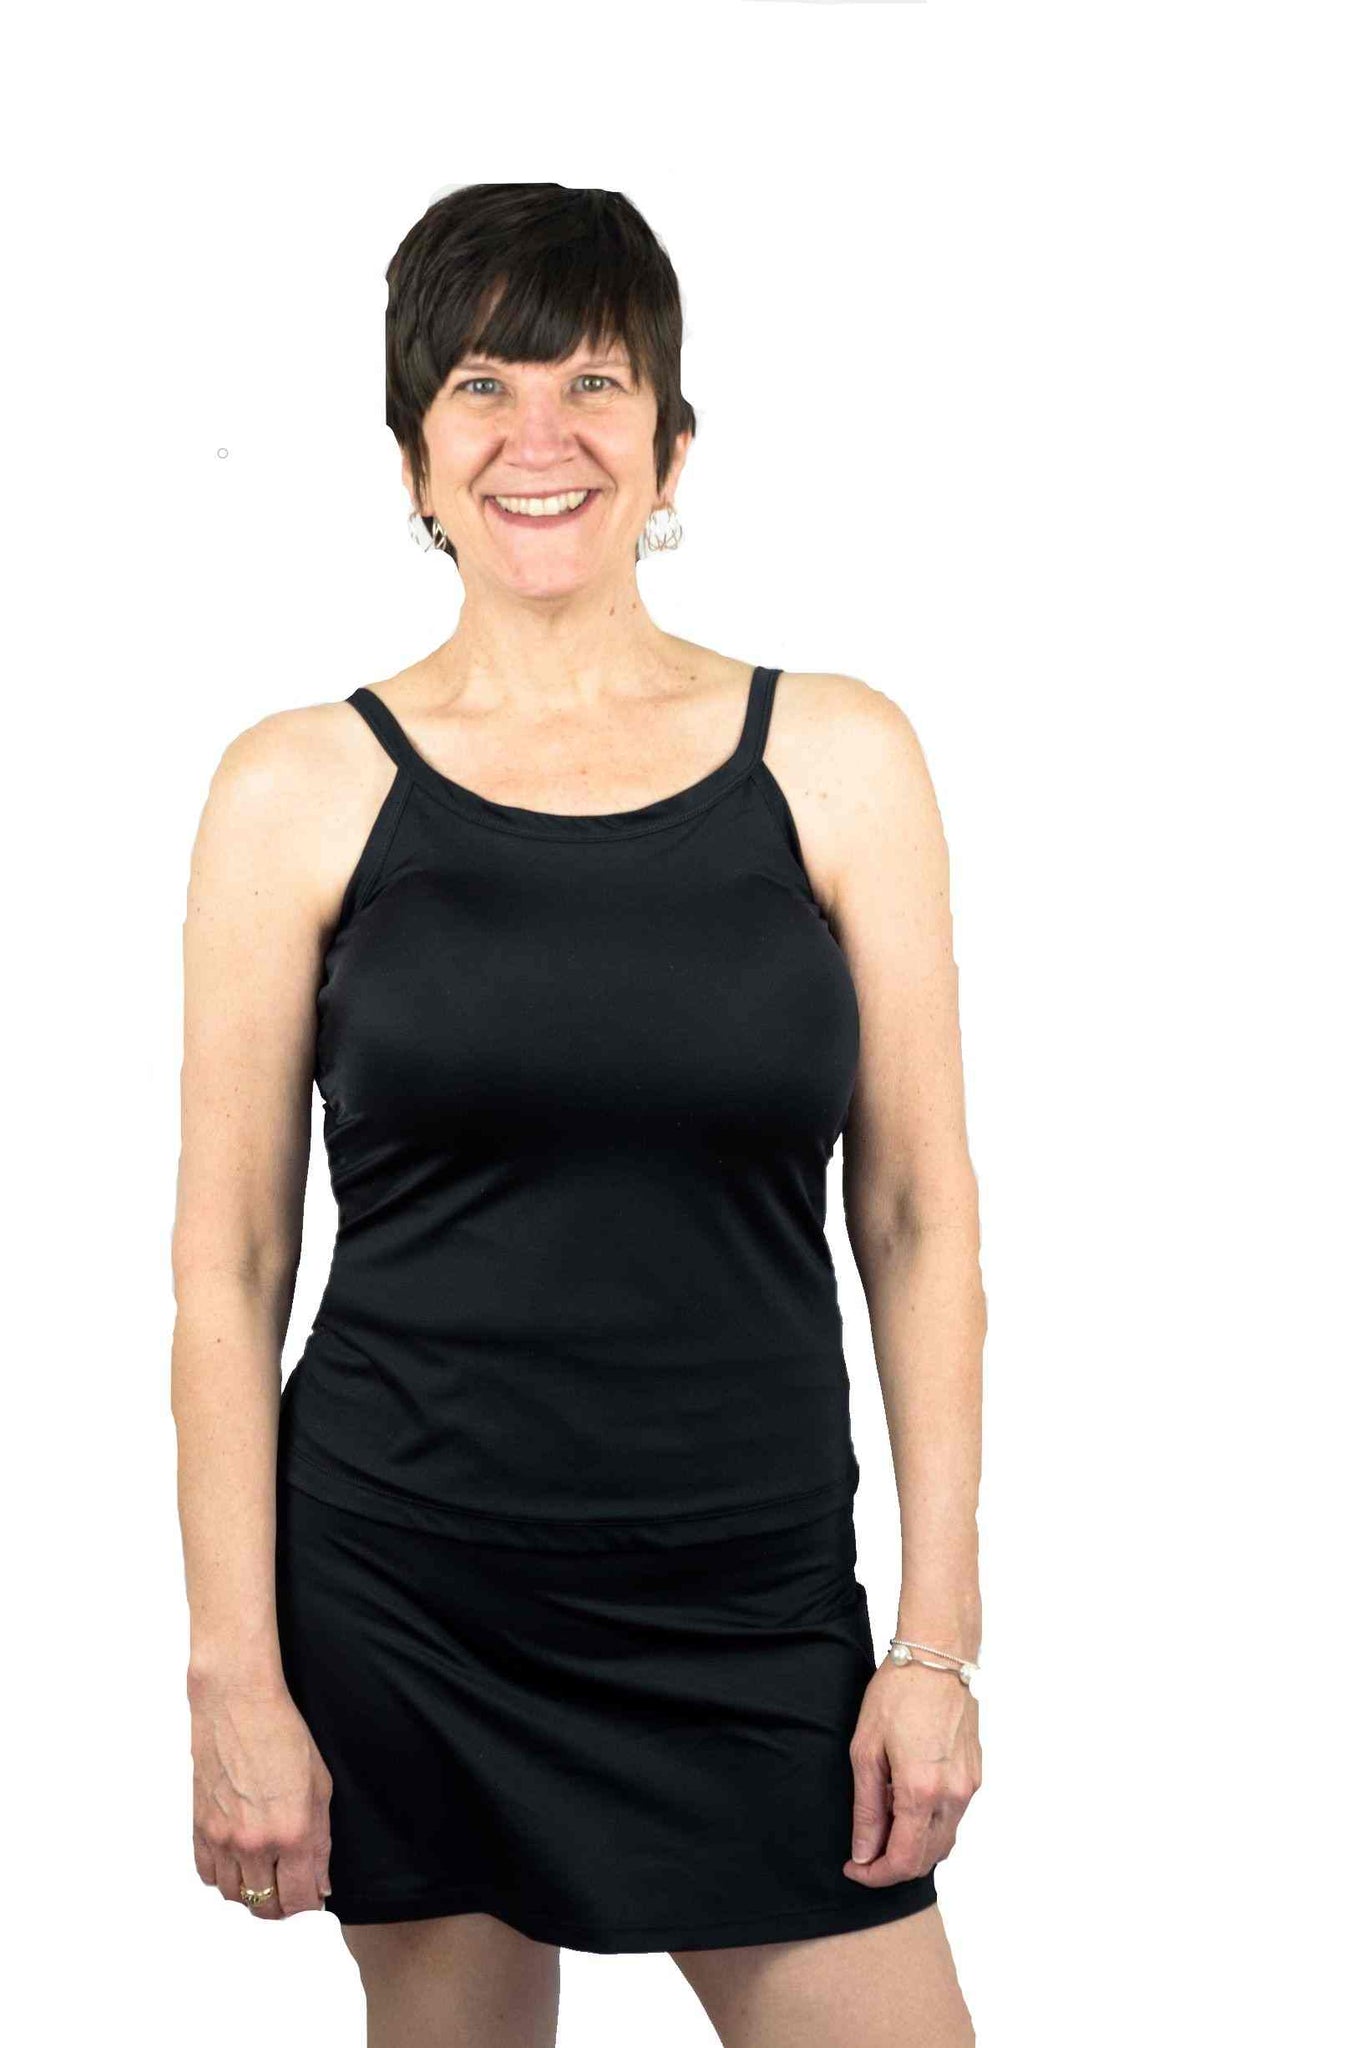 T.H.E. Mastectomy Bathingsuit Top without Built-In Bra - Wear with or  without your own bra